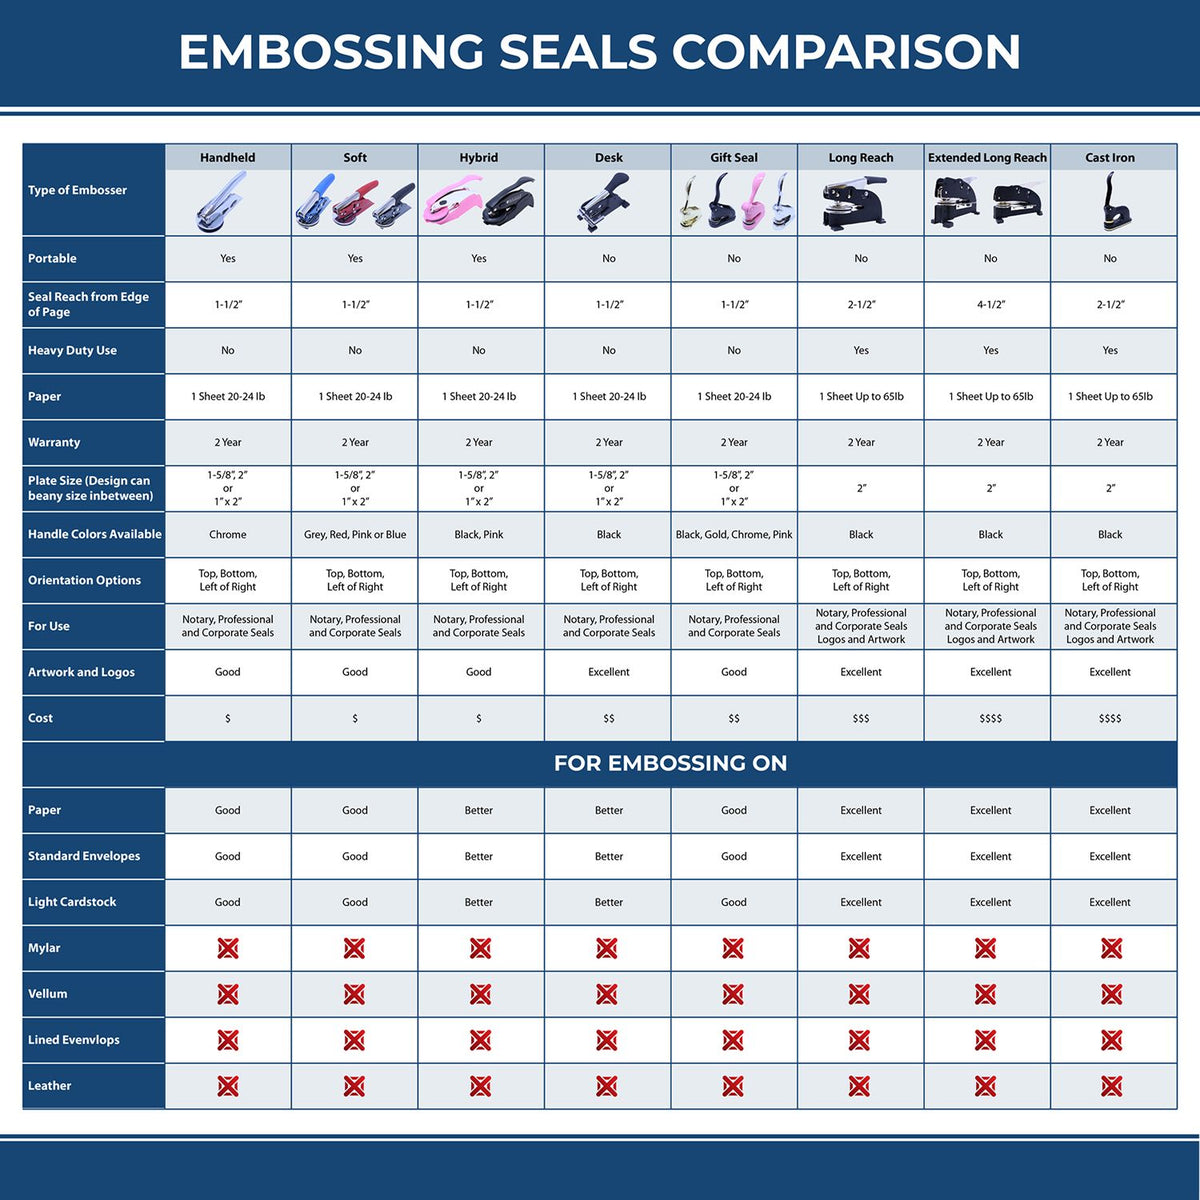 A comparison chart for the different types of mount models available for the Extended Long Reach Utah Architect Seal Embosser.